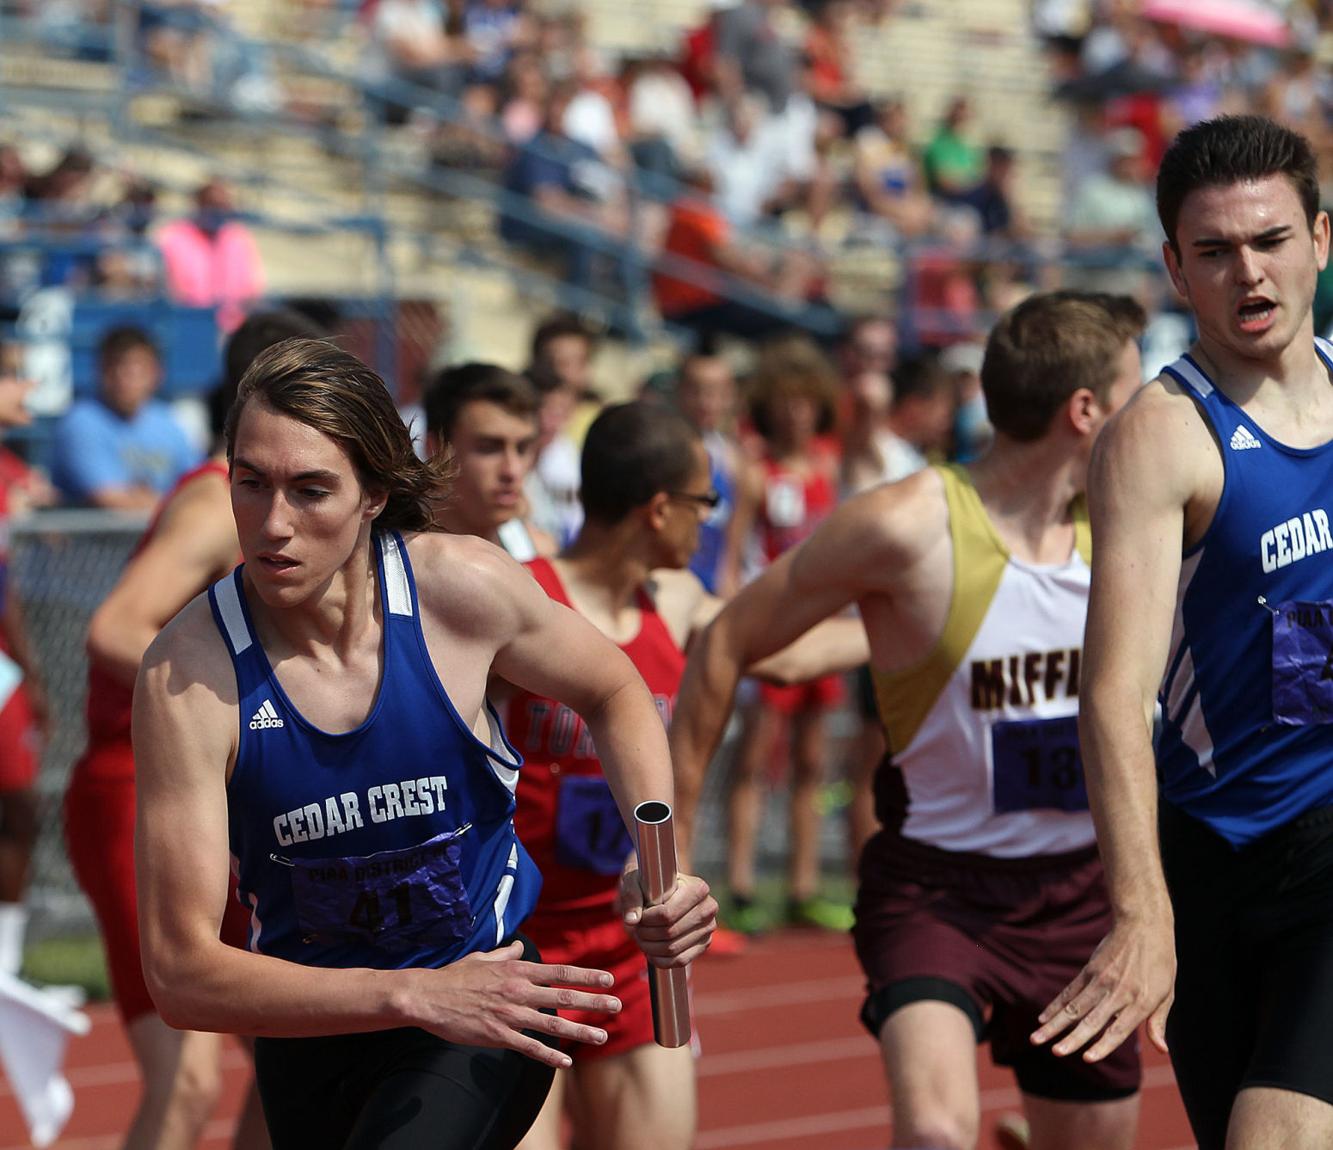 PIAA Track and Field Championships A look at LL boys in track events